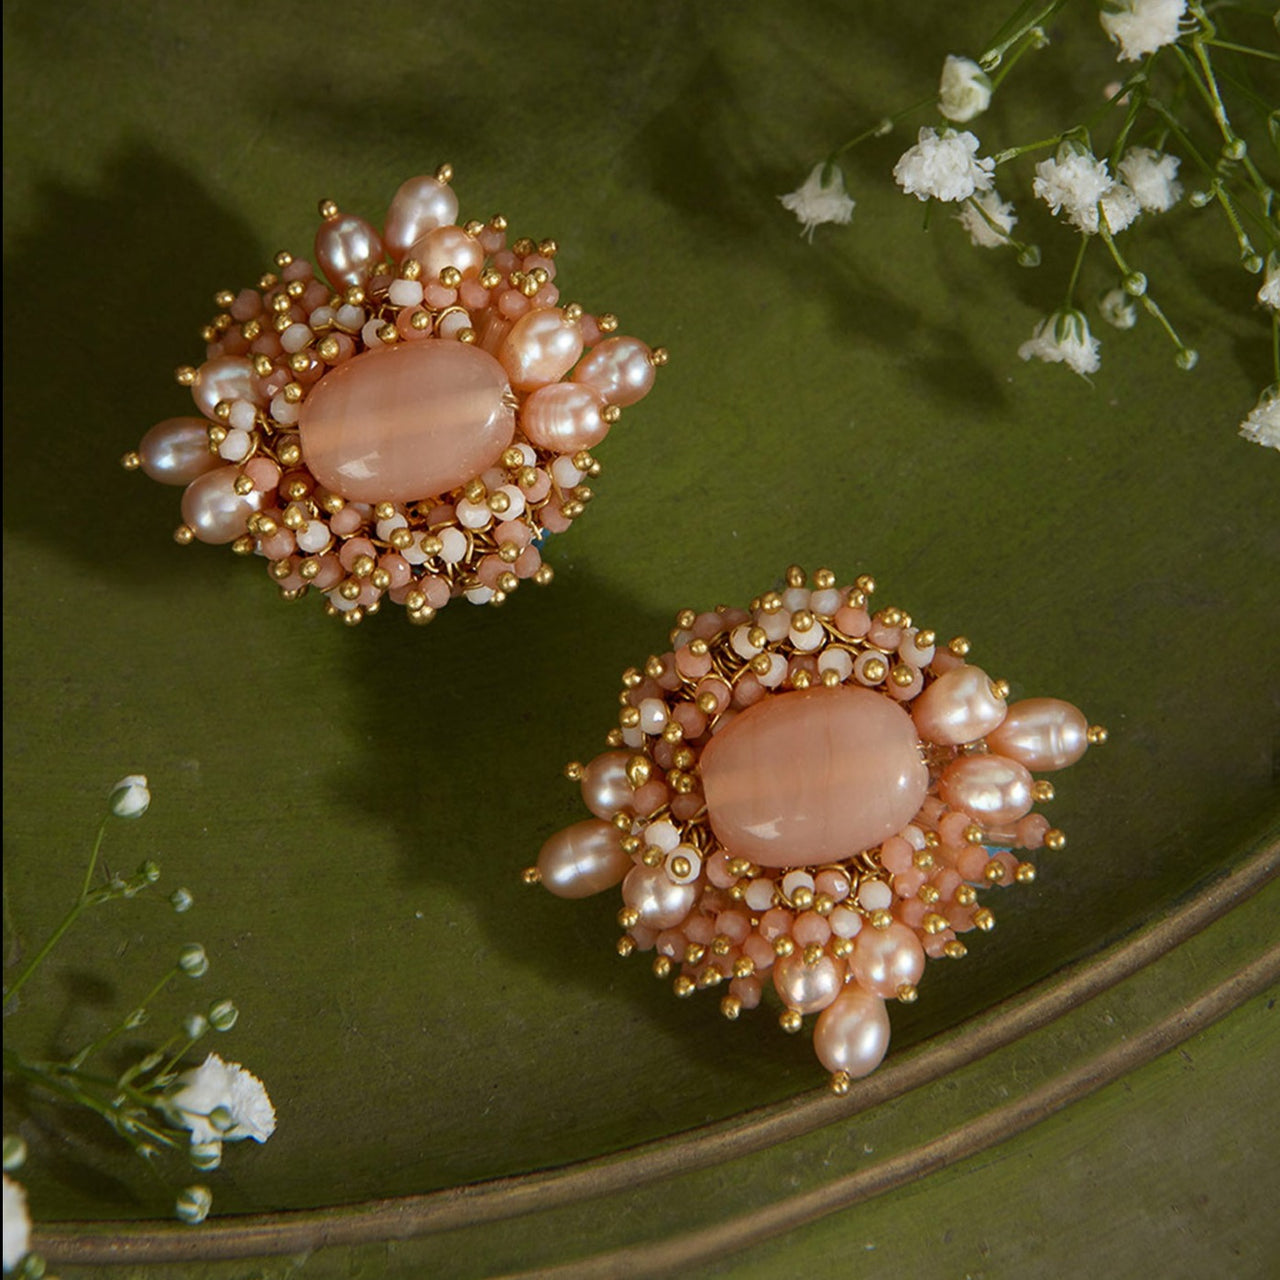 Statement Peach Stone Earrings With Fresh Water Pearls